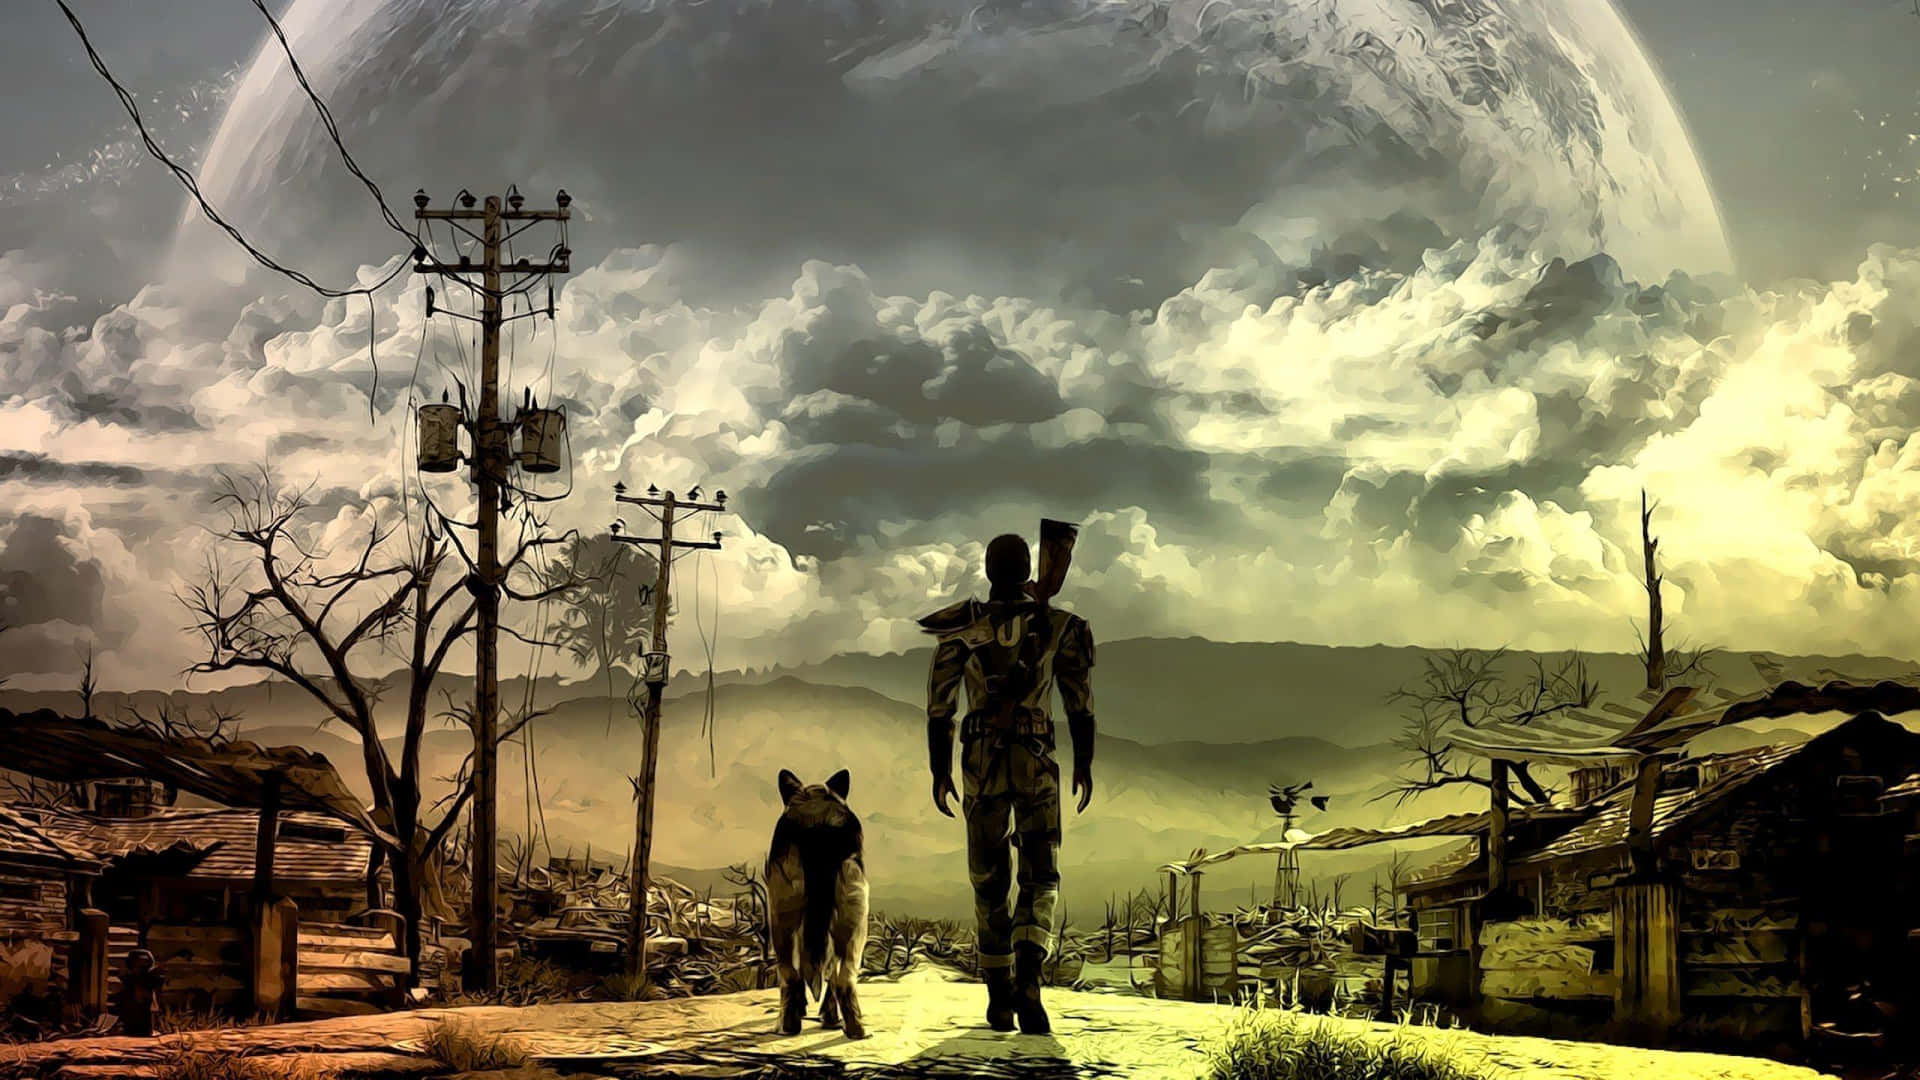 Discover the secrets of the post-apocalyptic world with Fallout 4 Computer Wallpaper